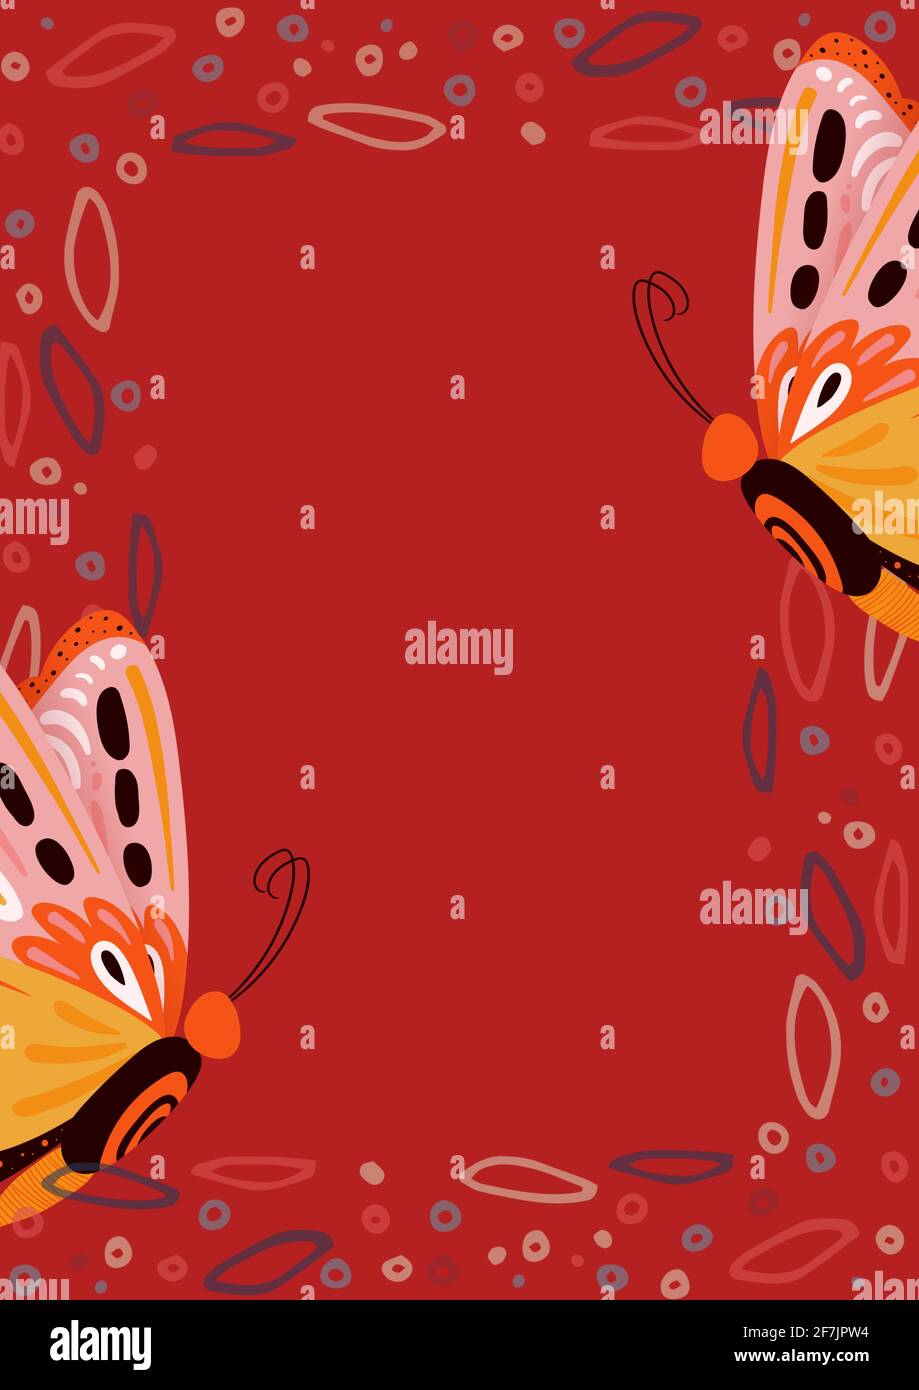 Composition of butterflies and abstract shapes with copy space on red background Stock Photo